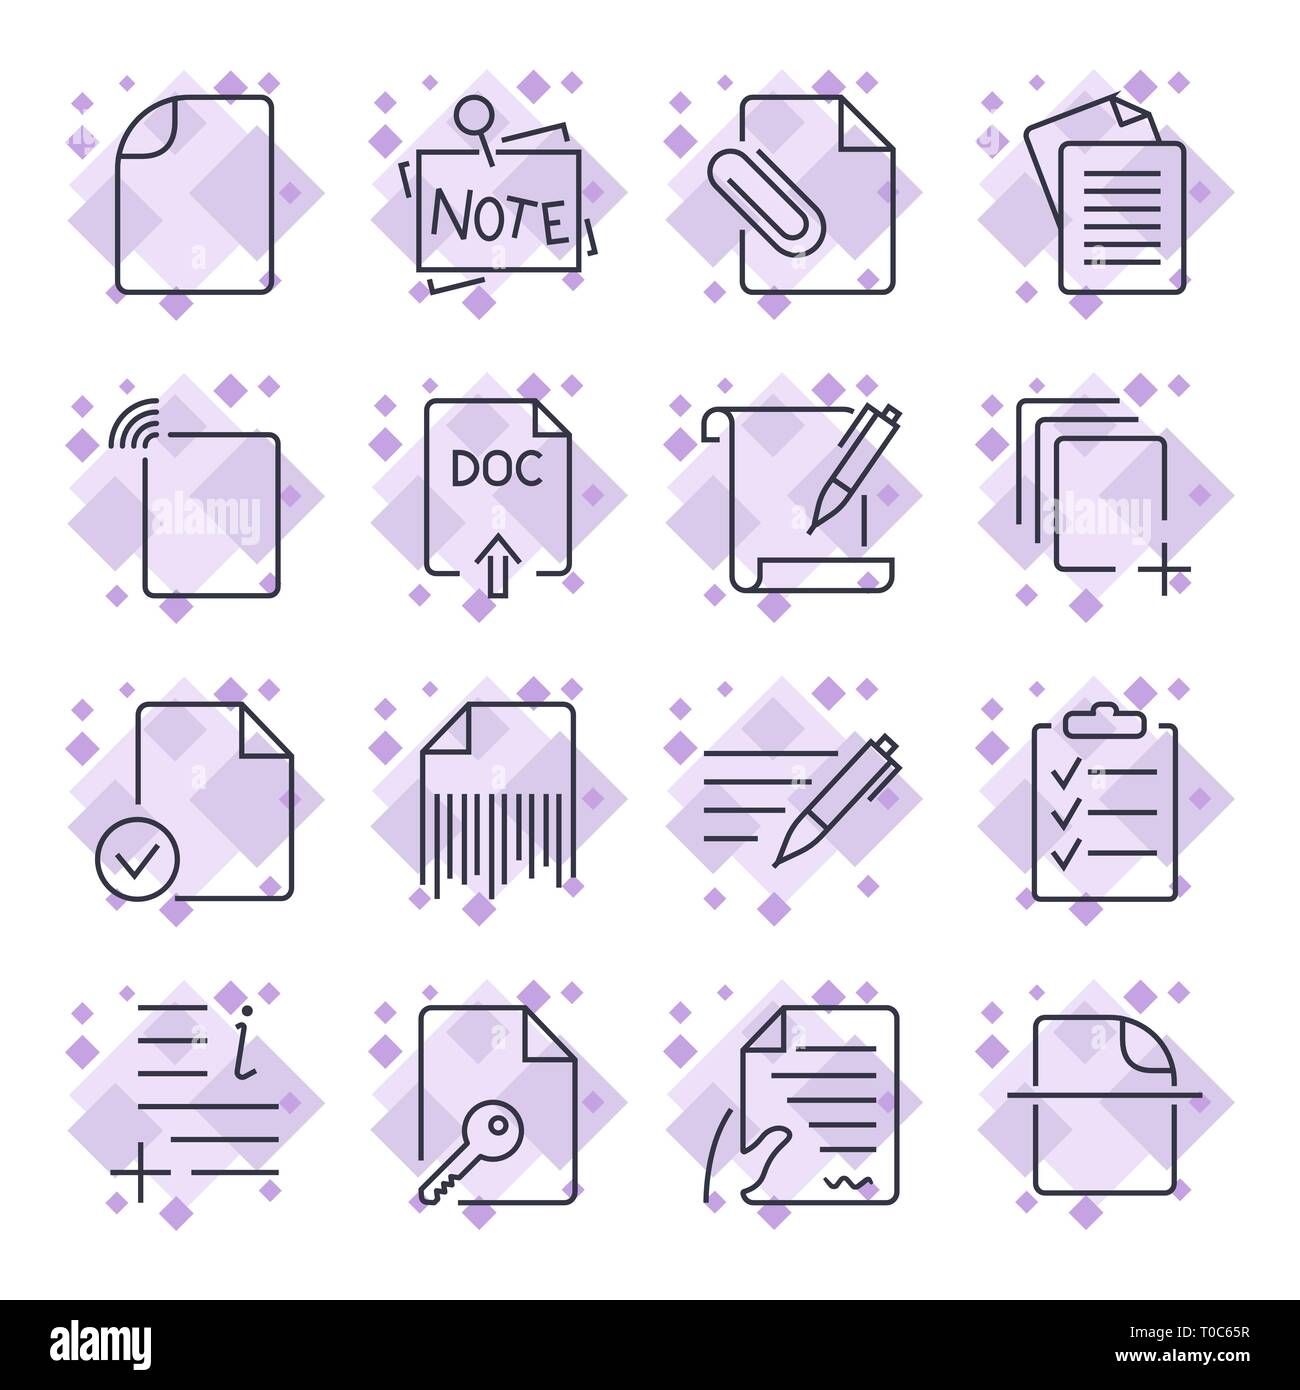 Paper icons. Document icons. Set of the icons with different document and paper icons for sites, apps, programs, logotypes and other. Editable Stroke. Stock Vector